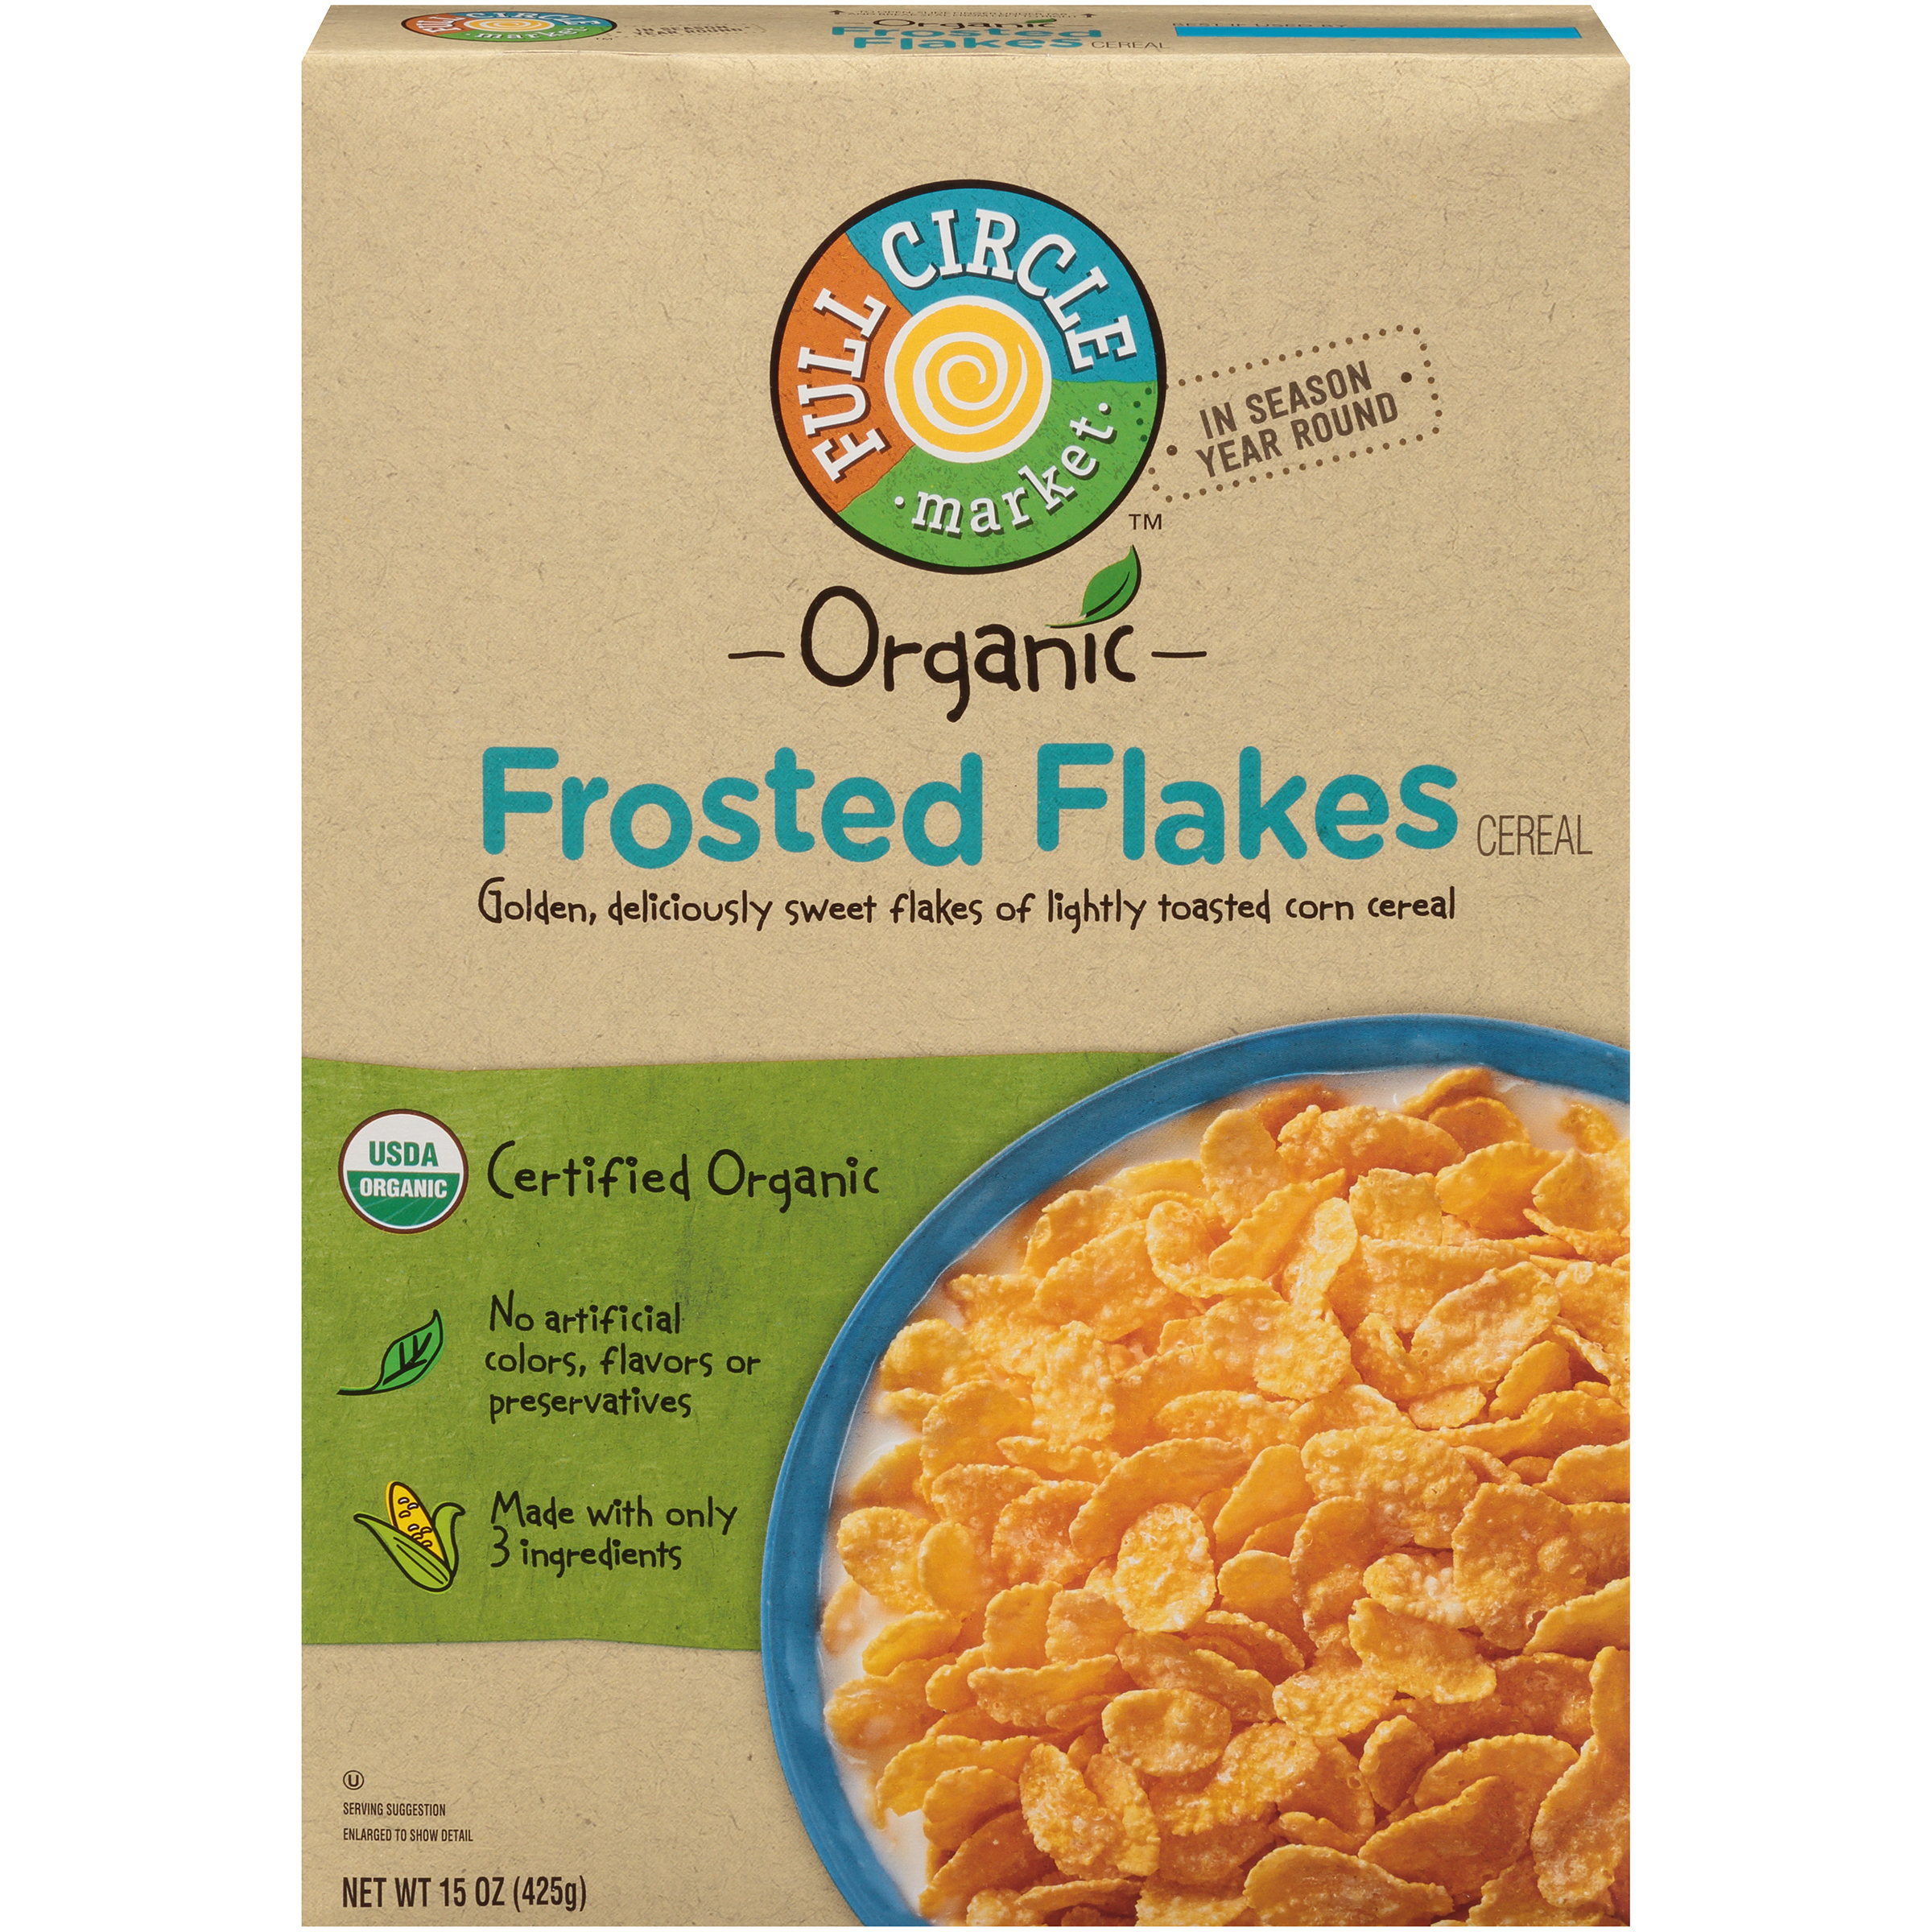 Kellogg's Frosted Flakes® Cereal - SmartLabel™